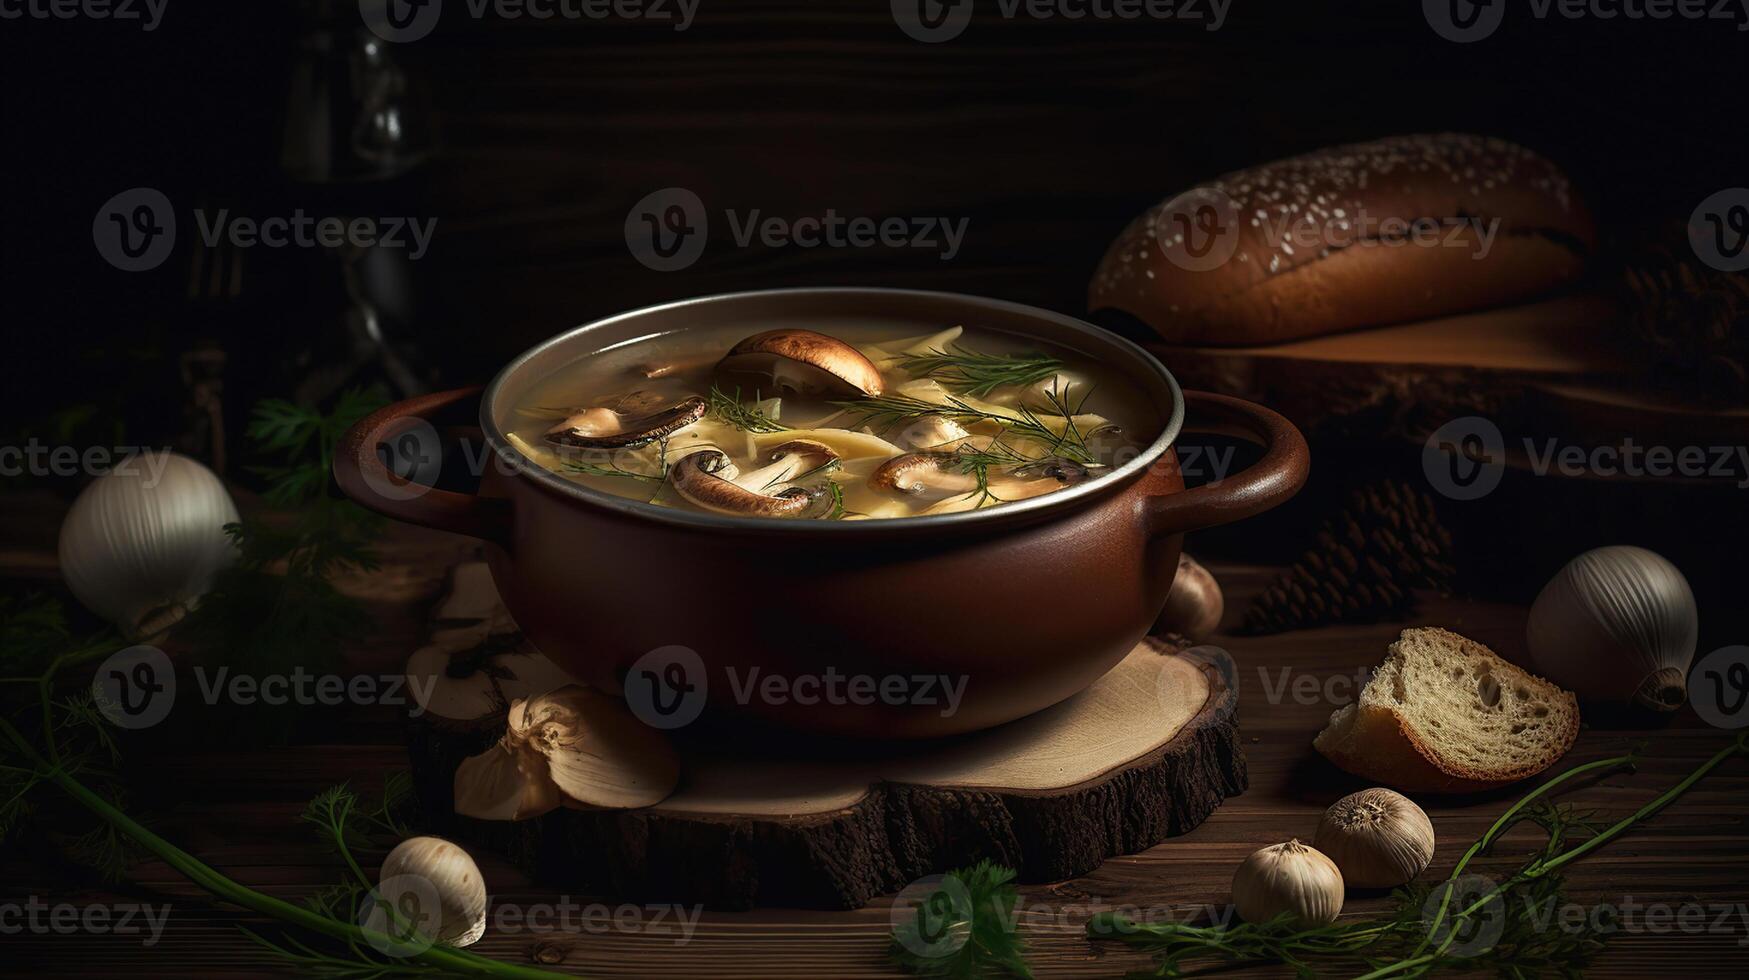 Delicious hot porcini soup in copper pan. Tasty seasonal autumn meal. Fresh mashrooms illustrate ingredients. Concept of homemade russian food. photo